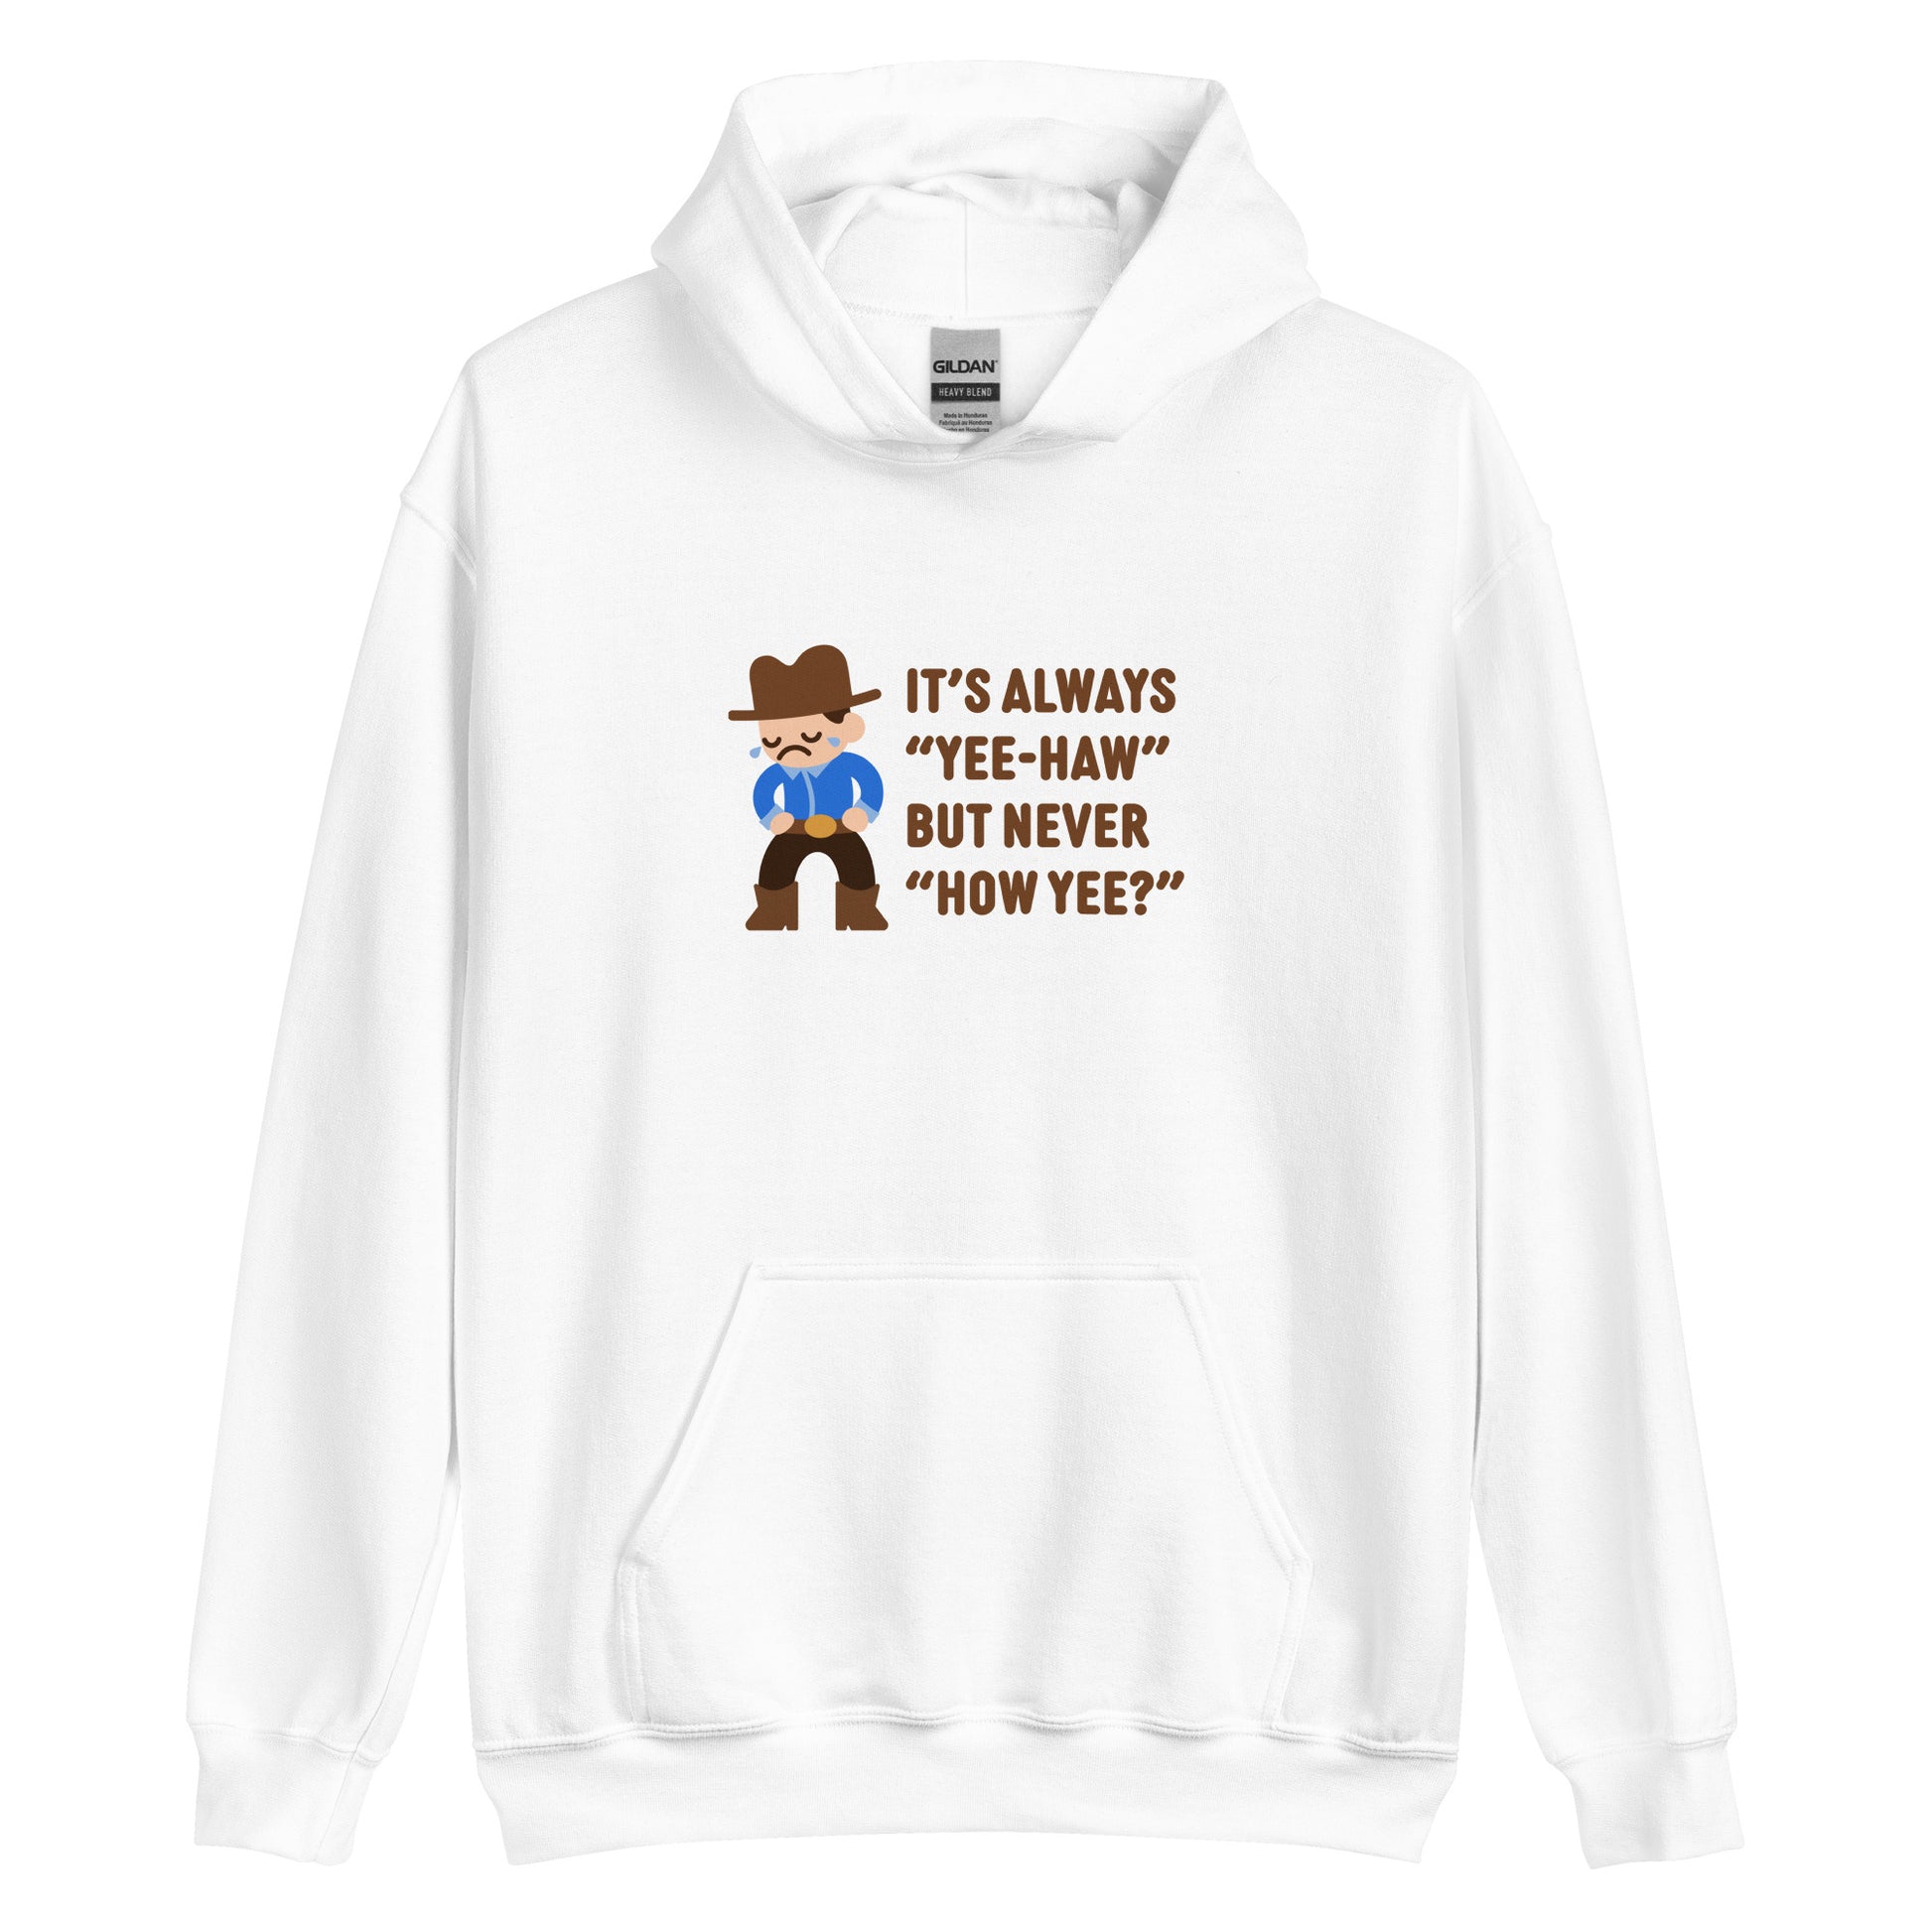 A white hooded sweatshirt featuring an illustration of a crying cowboy wearing a blue shirt. Text alongside the cowboy reads "It's always "yee-haw" but never "How yee?""